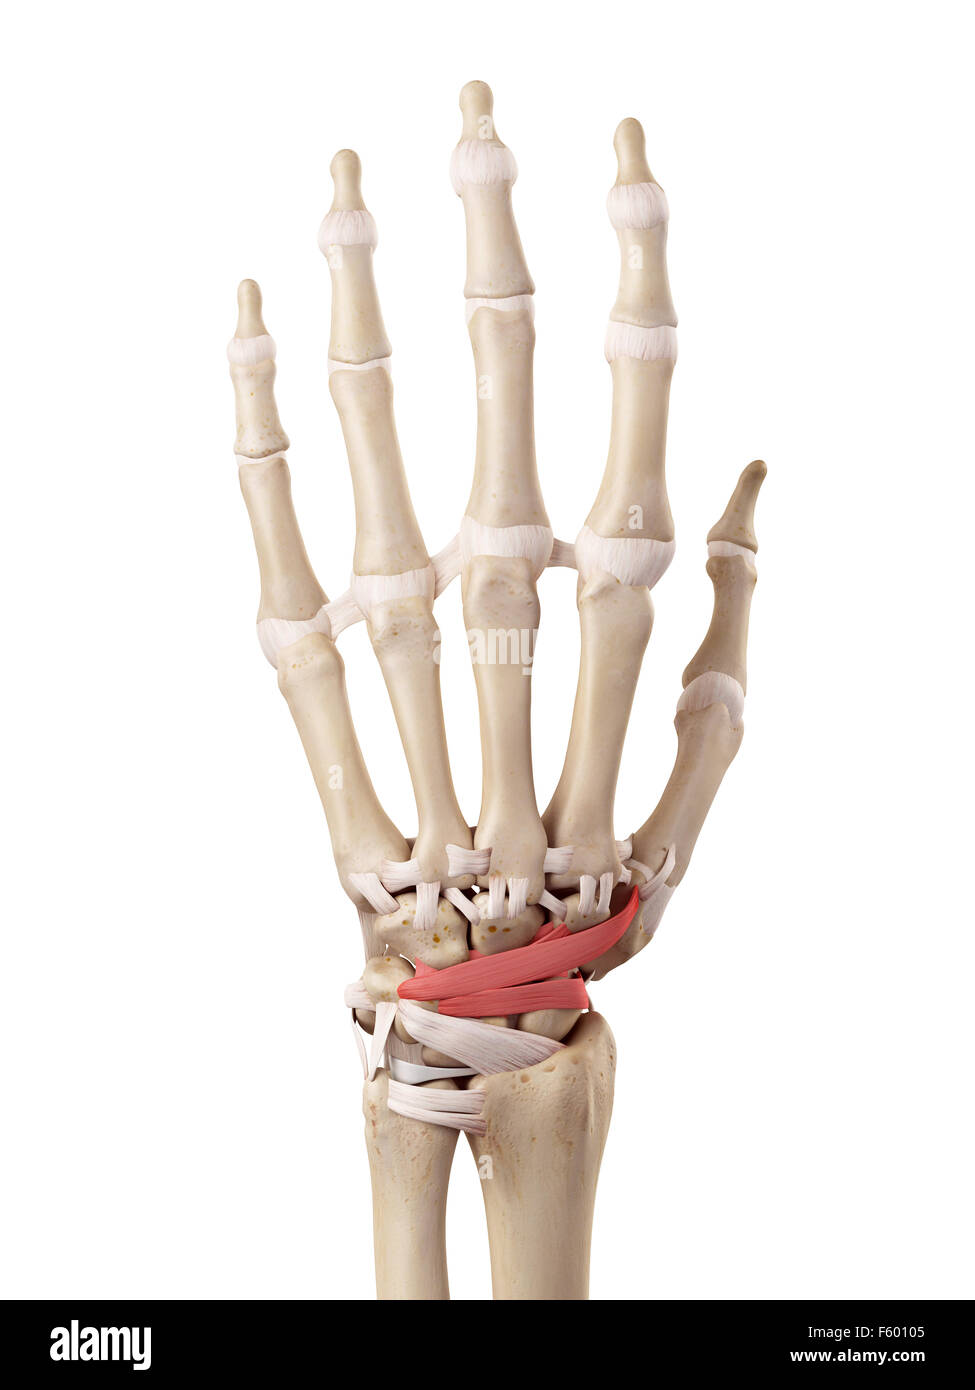 medical accurate illustration of the dorsal intercarpal ligaments Stock Photo